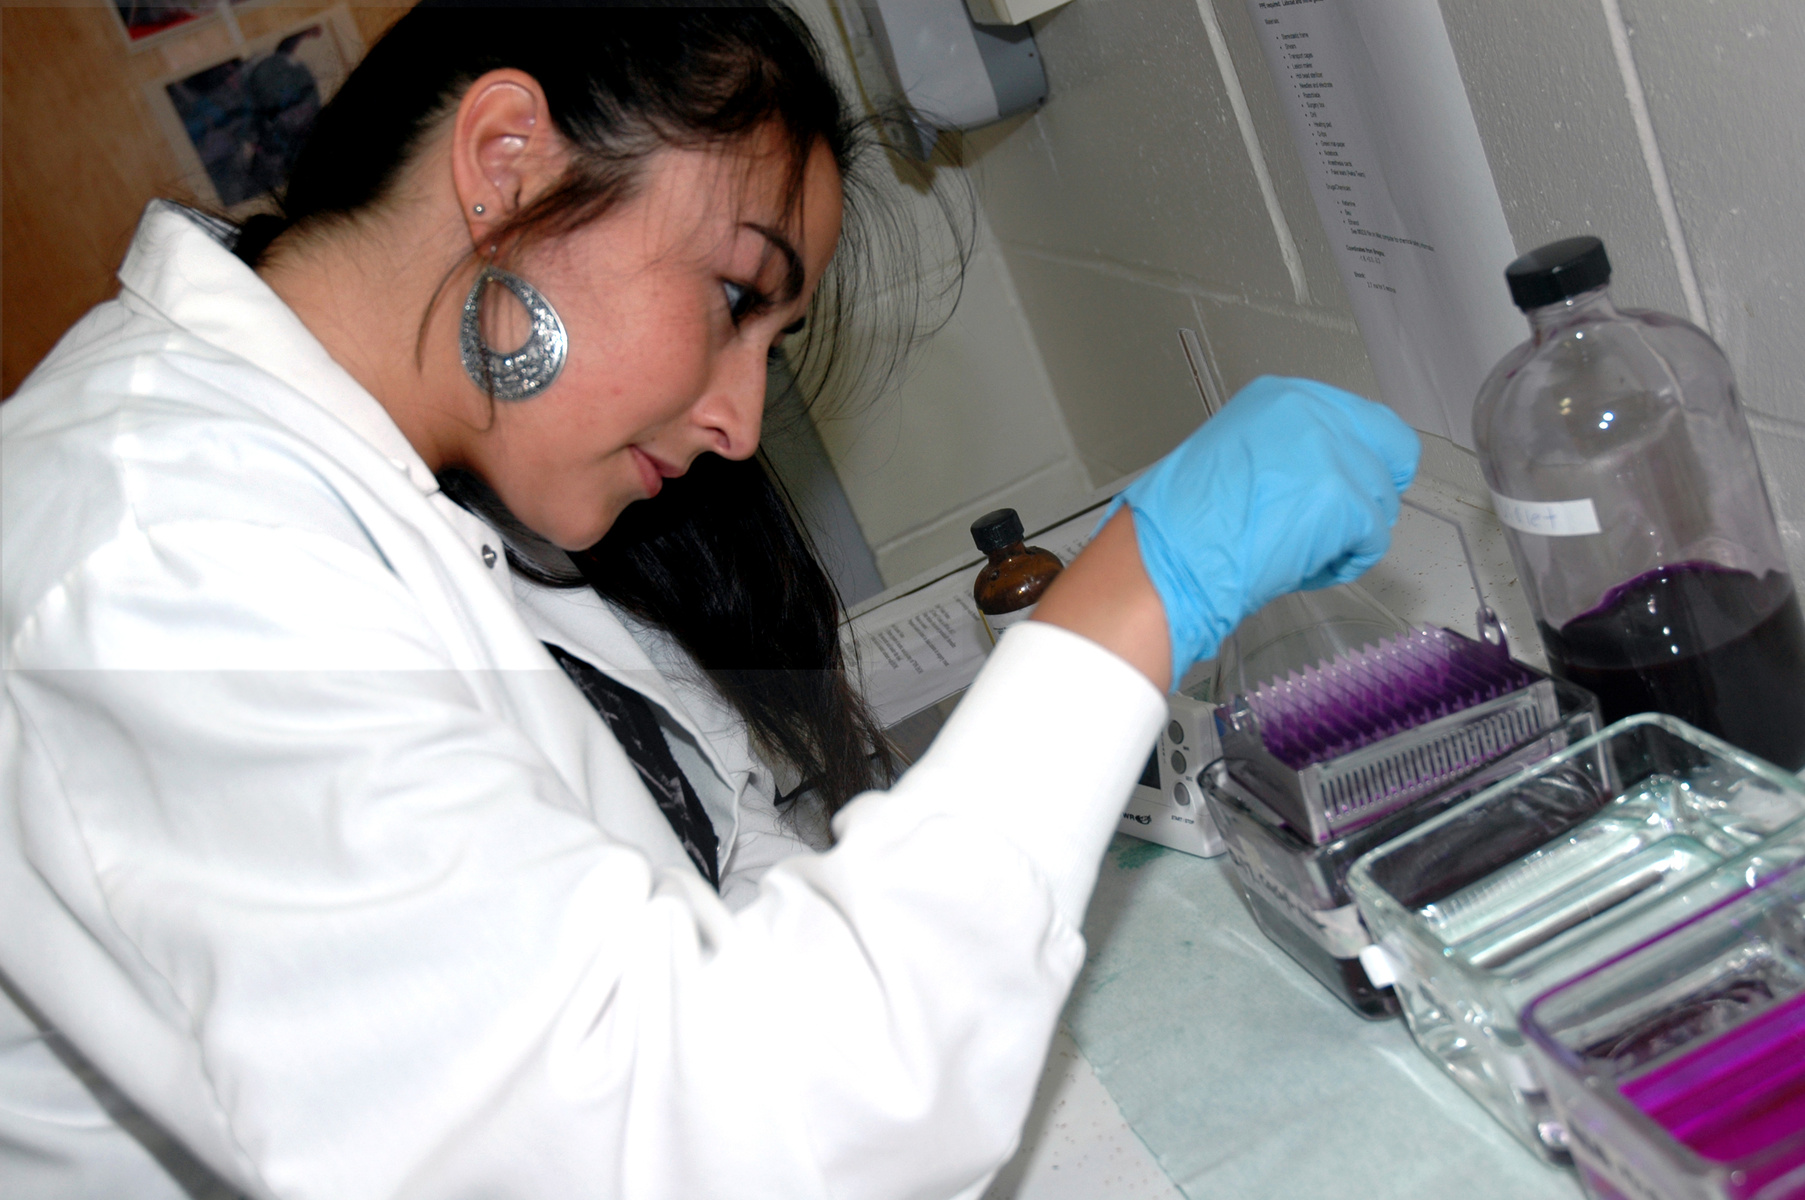 A female student in a white lab coat arranges micrscope slides in a glass case